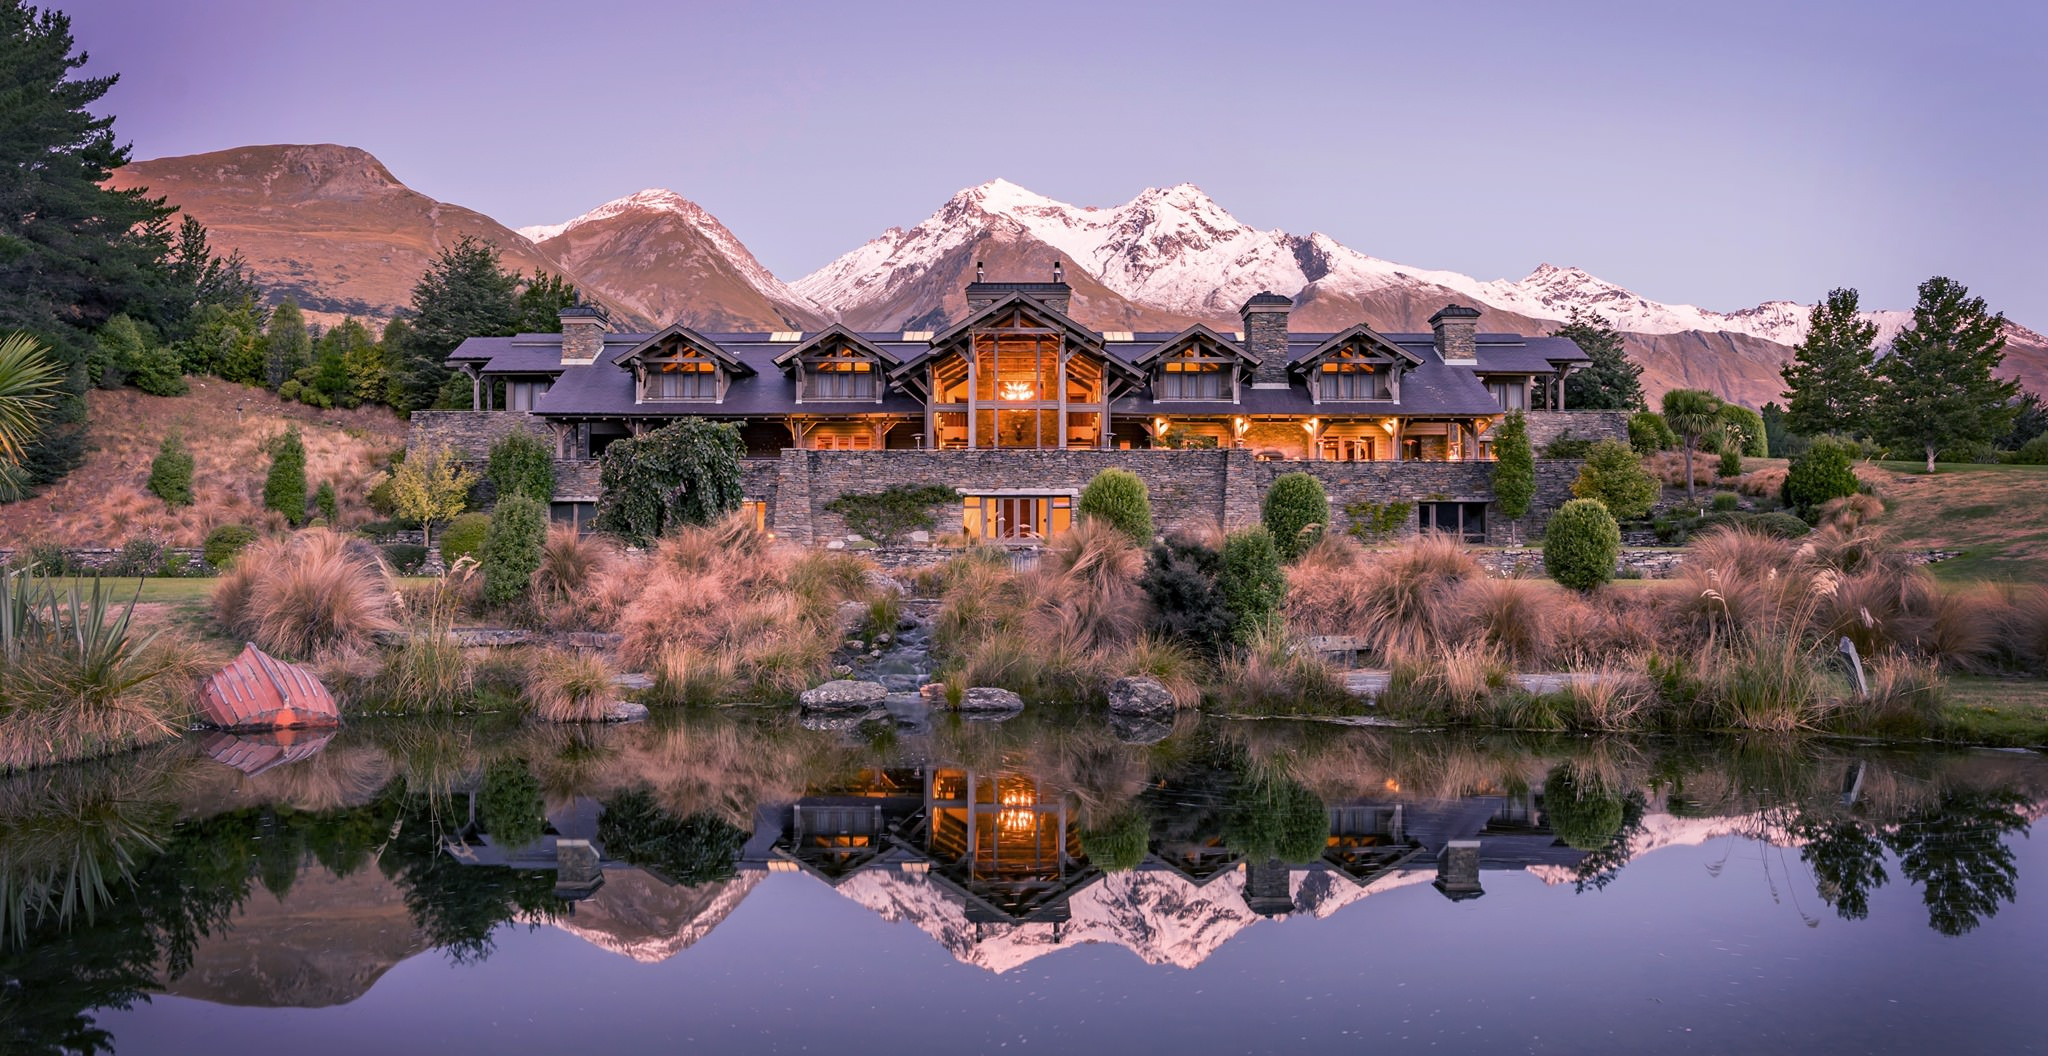 Rent rise spells end for Glenorchy lodge